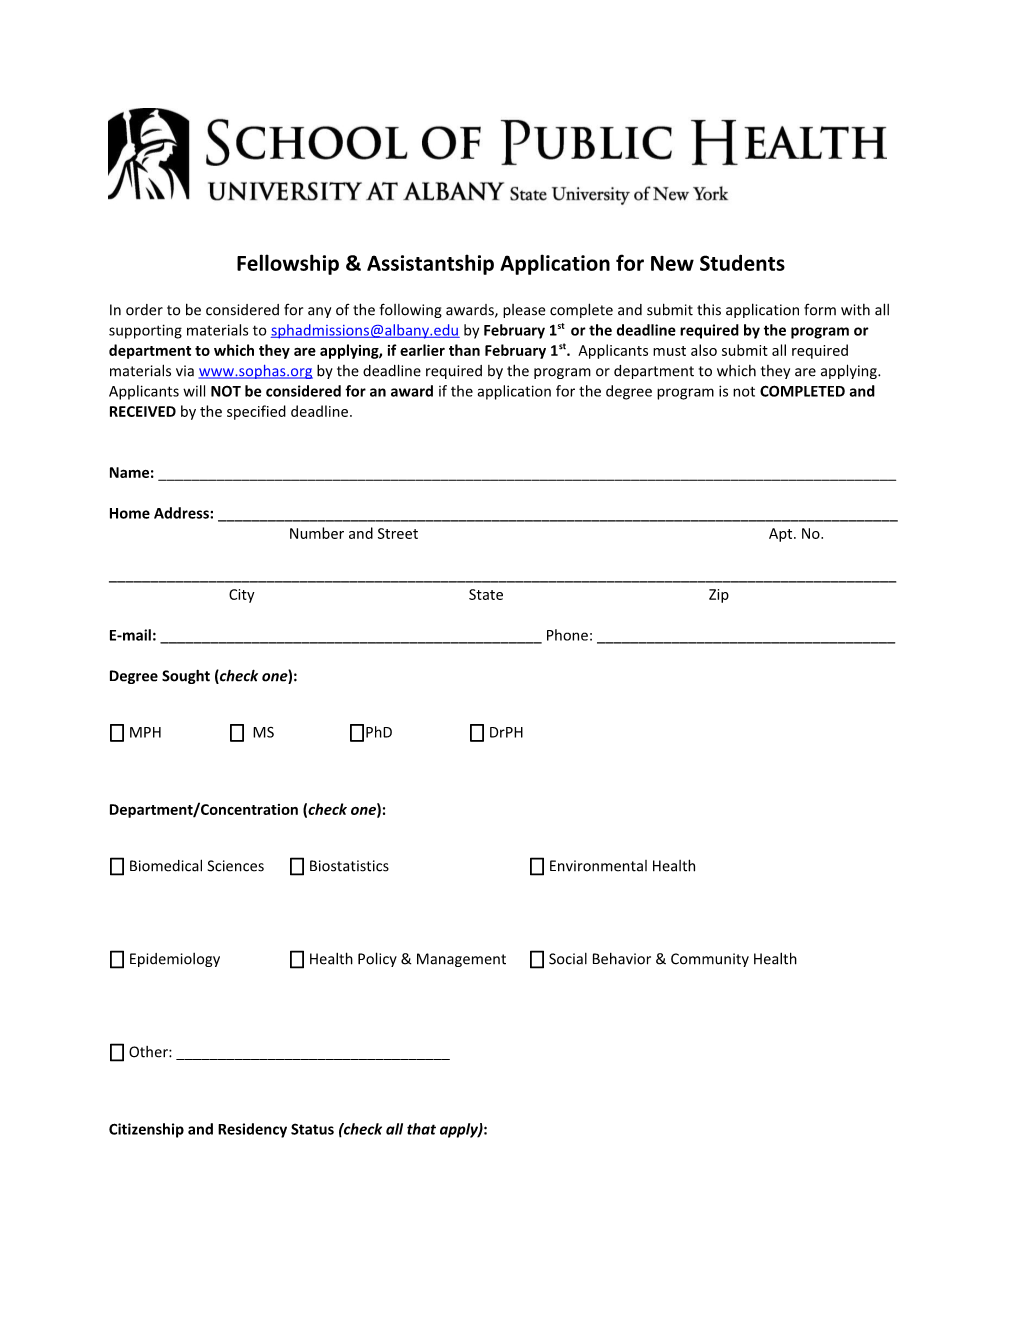 Fellowship & Assistantship Application for New Students